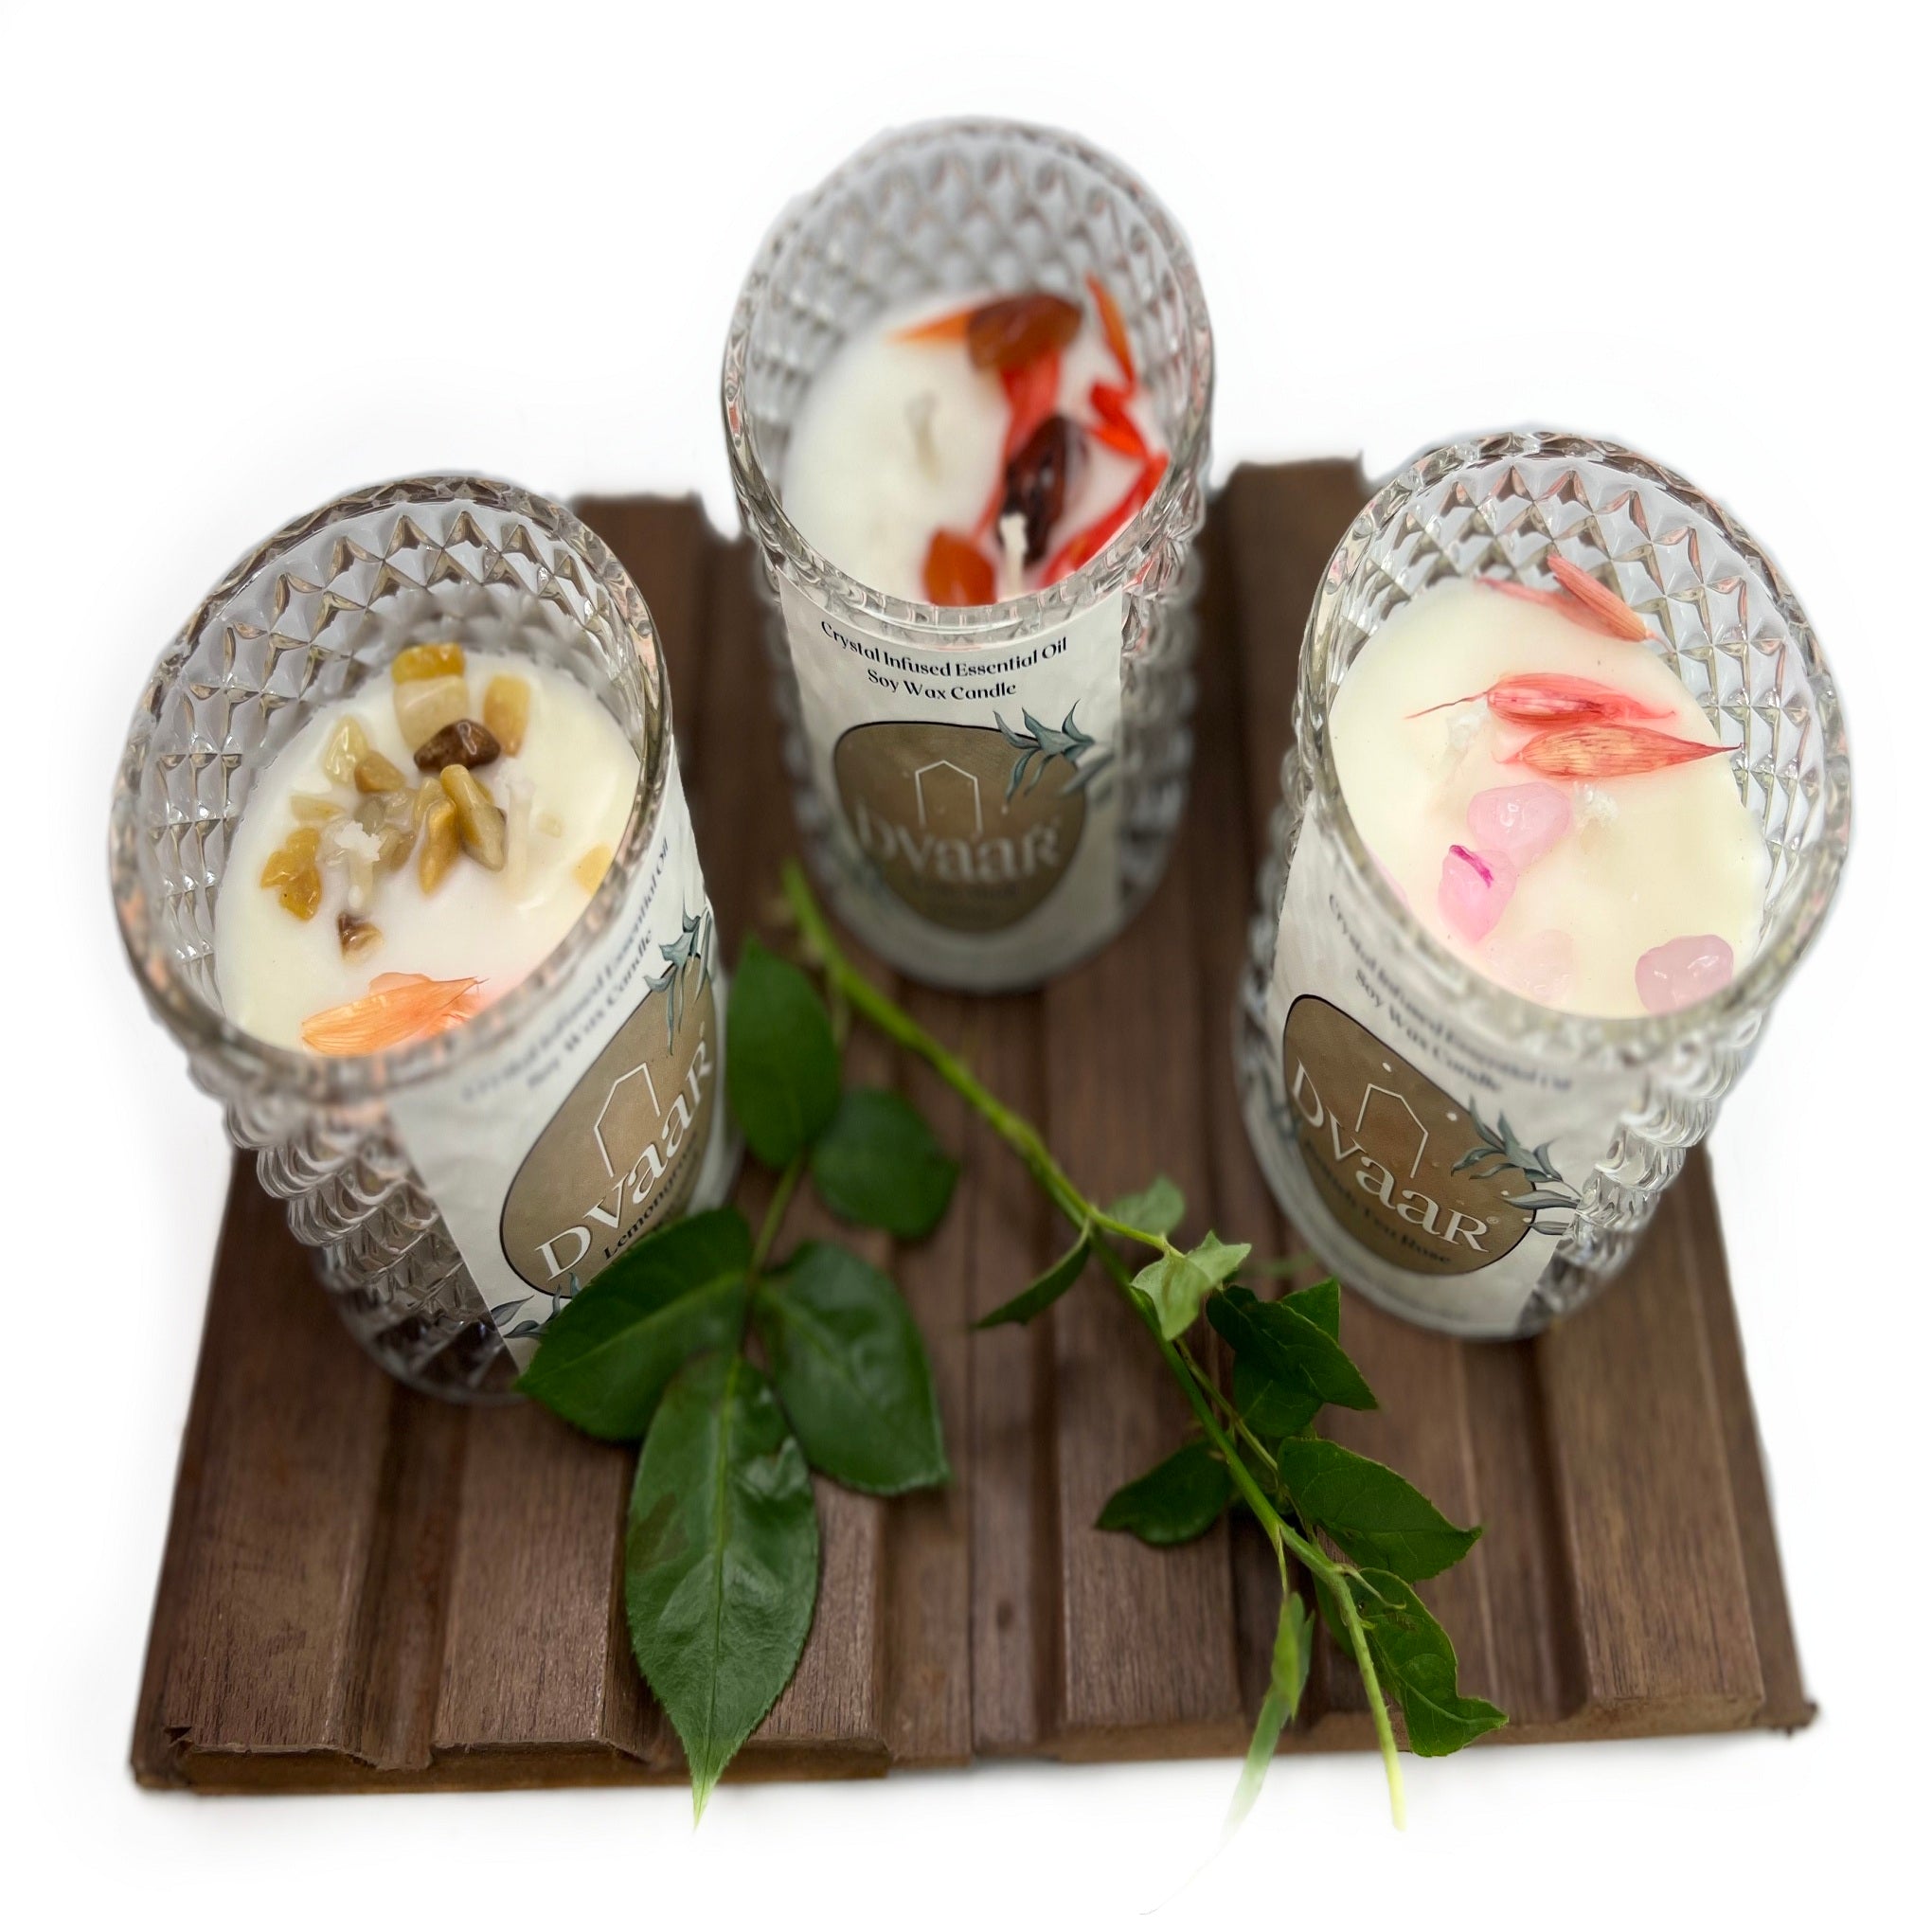 DVAAR SOYA WAX CANDLES SCENTED AROMATHERAPY MEDITATION HAND CRAFTED WITH NATURAL OILS CRYSTALS with GLASS JAR 280 GMS. FRAGRANCE-Lemon grass